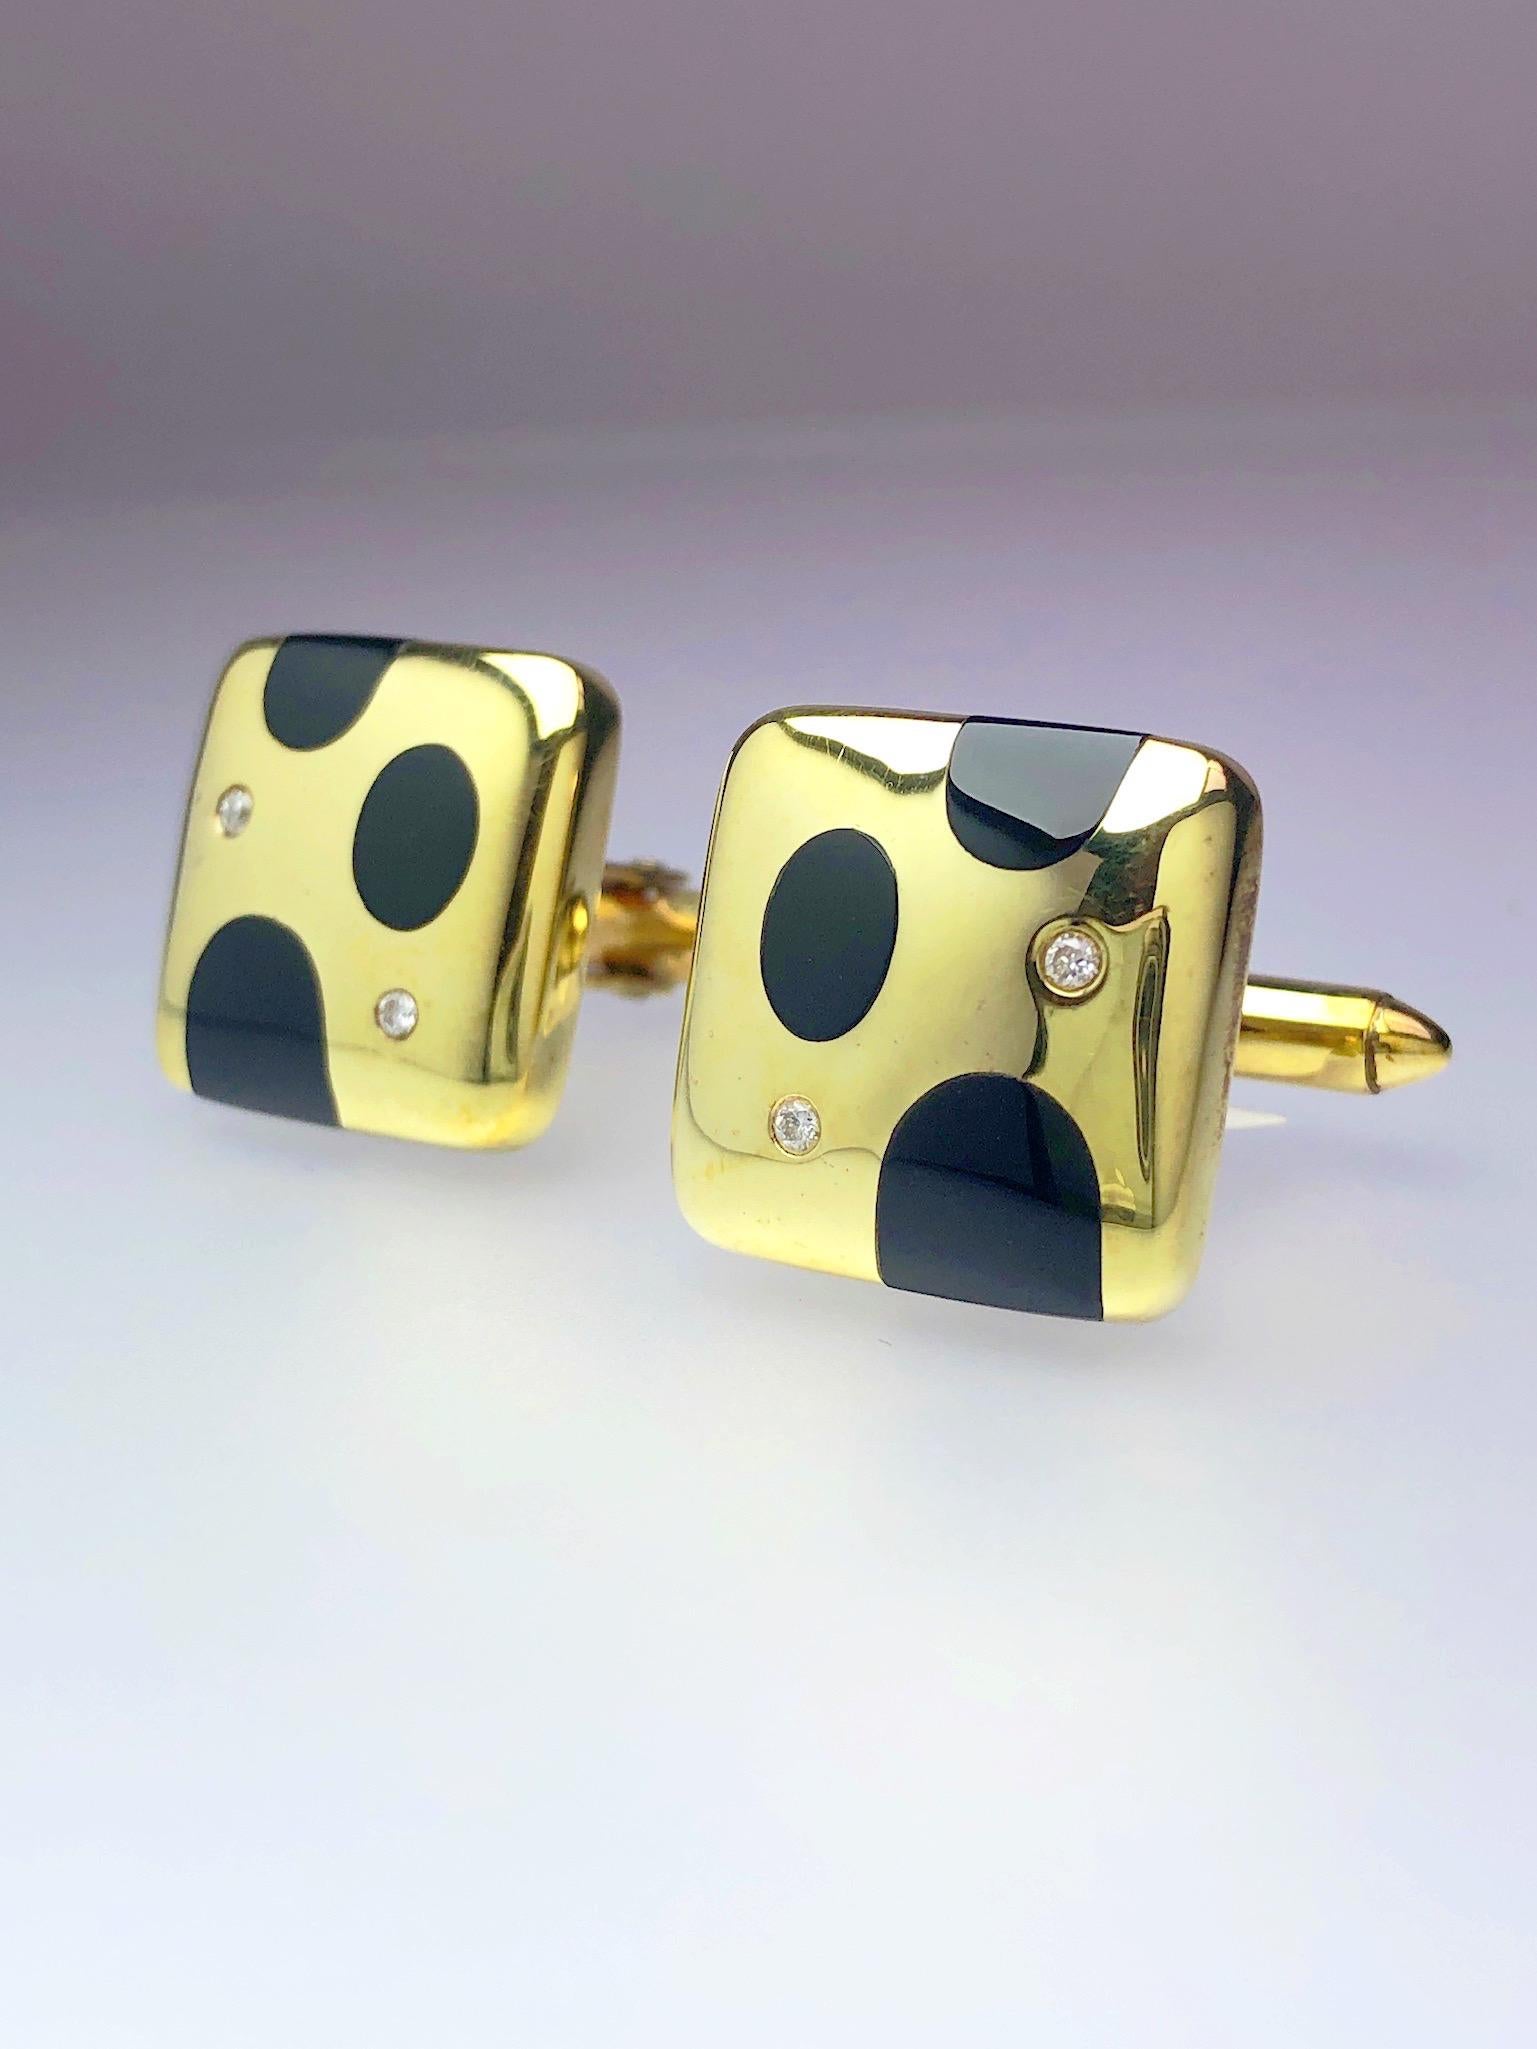 High polished 18 karat yellow gold cushion shaped cufflinks set with black onyx polka dots with diamond accents. The cufflinks measure approximately 1/2